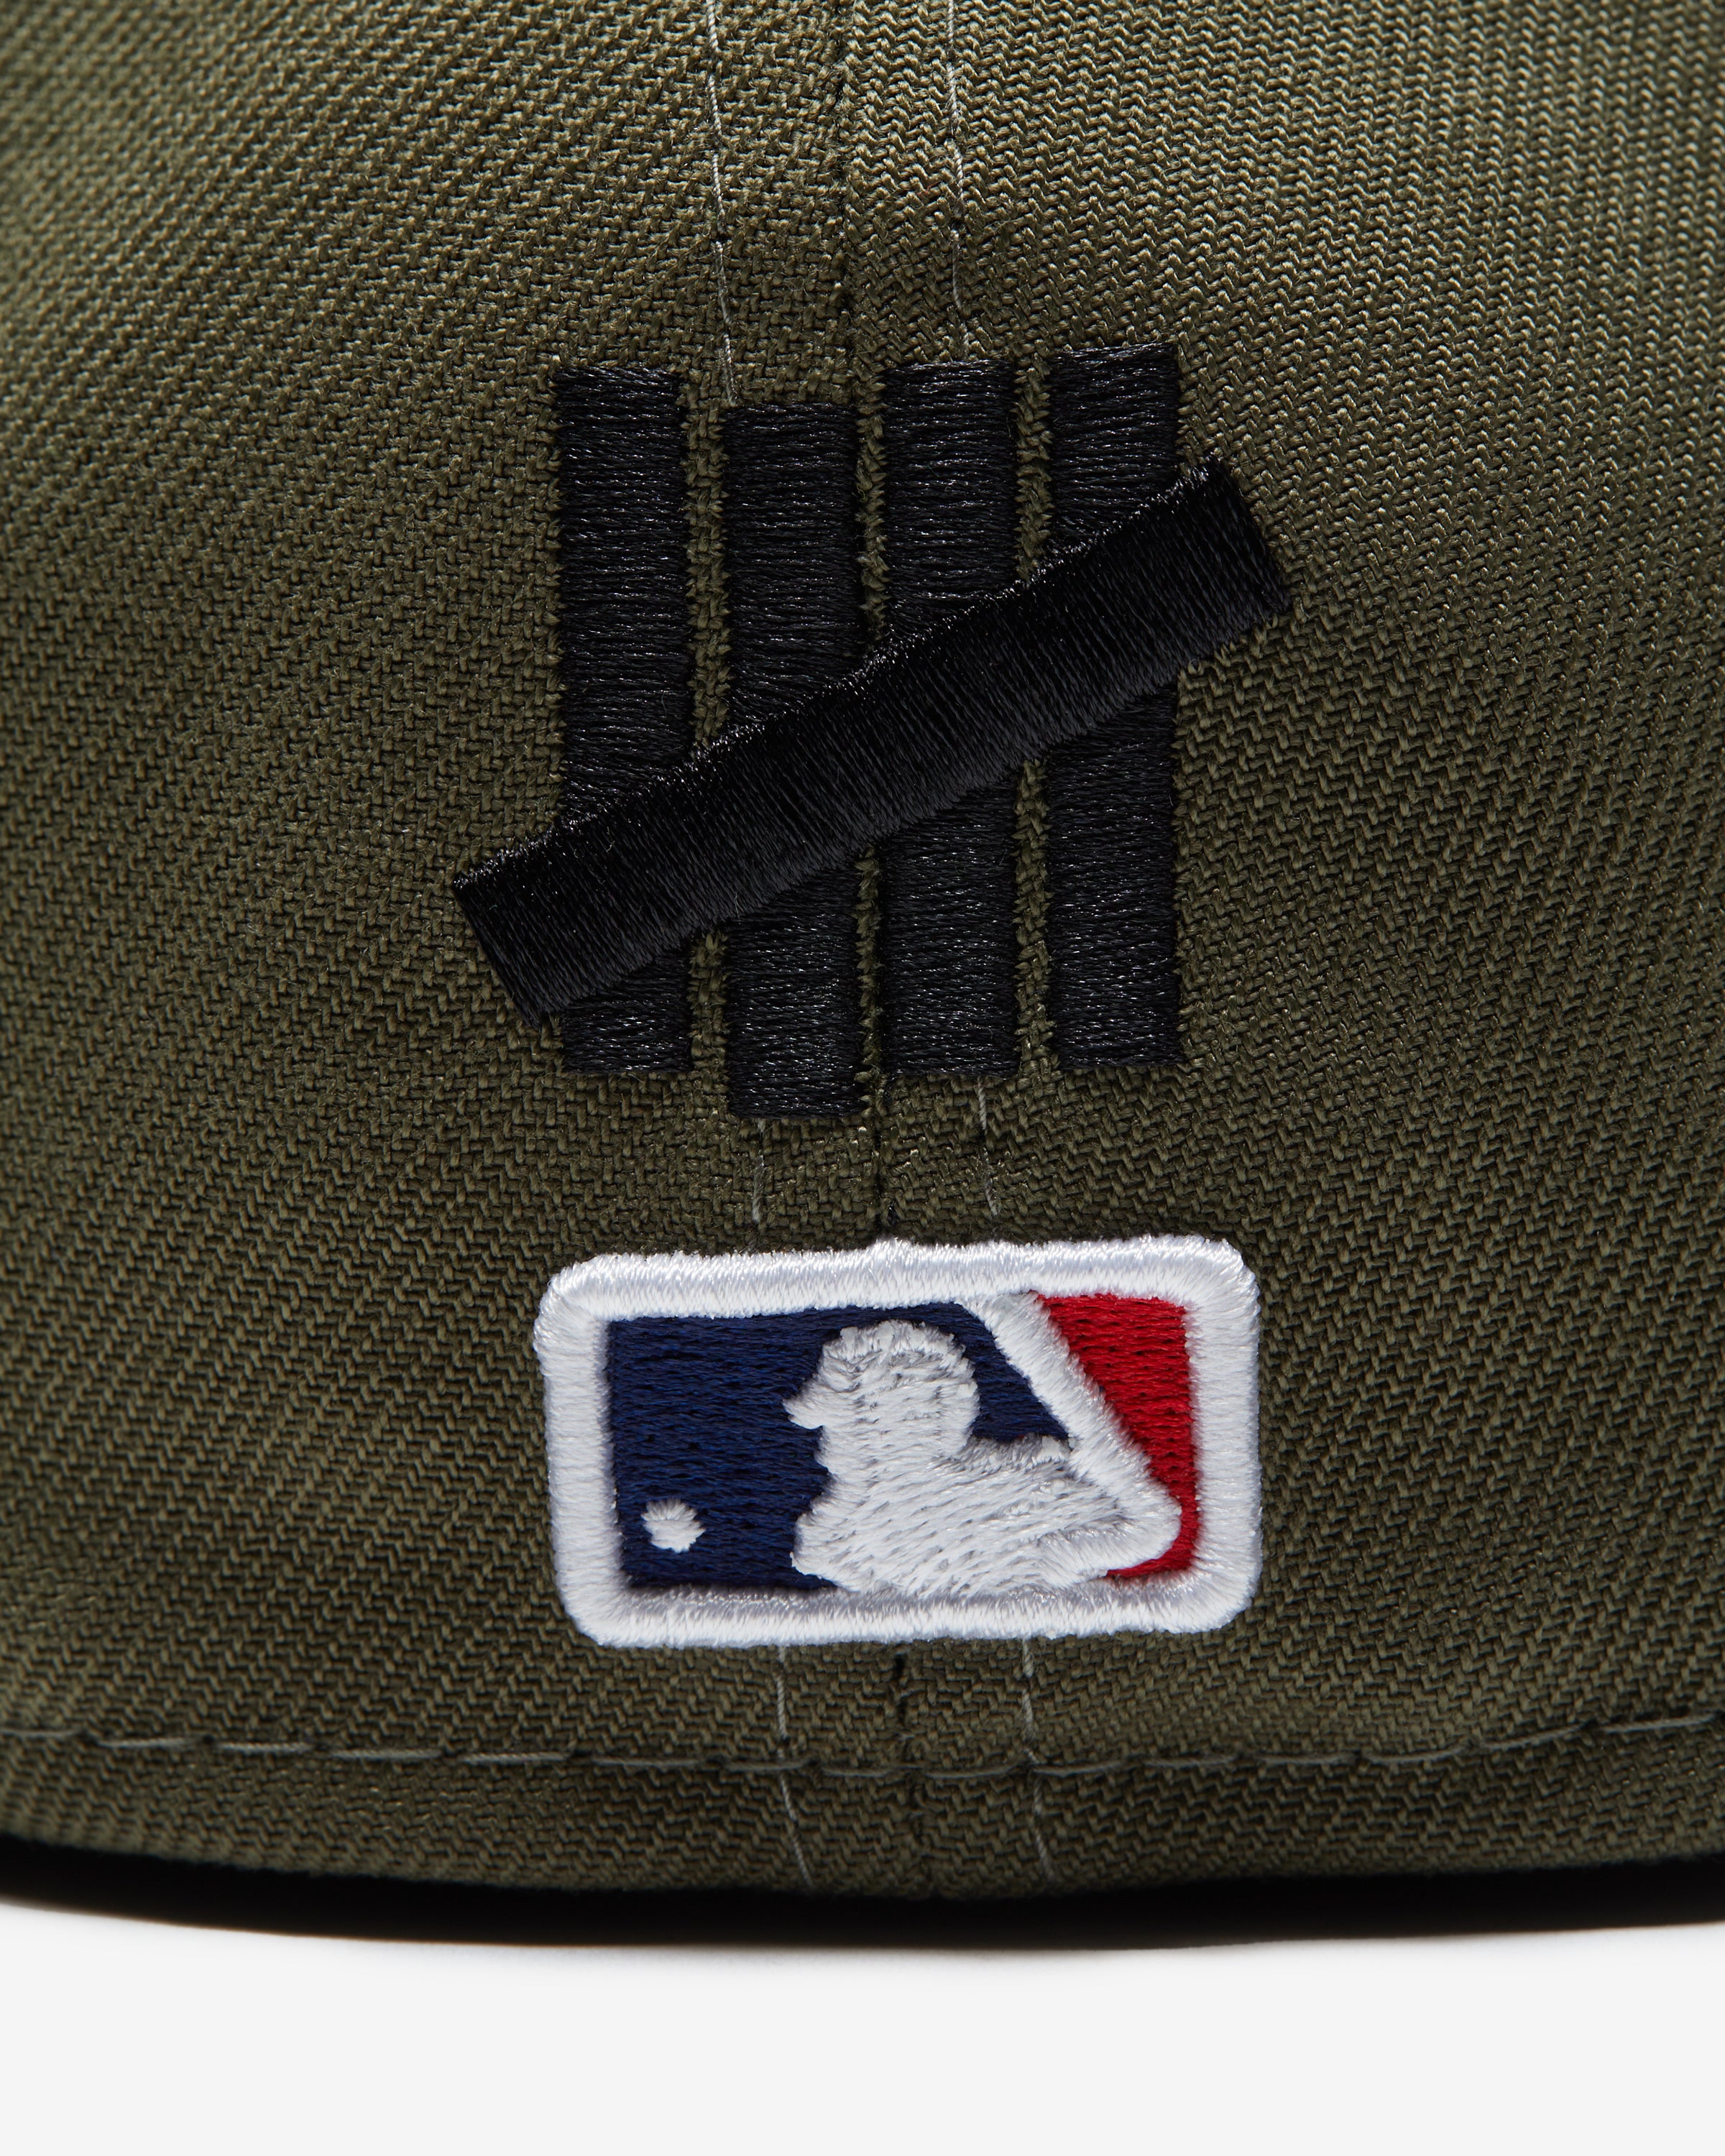 UNDEFEATED X NEW ERA NY YANKEES 59FIFTY FITTED - OLIVE – Undefeated